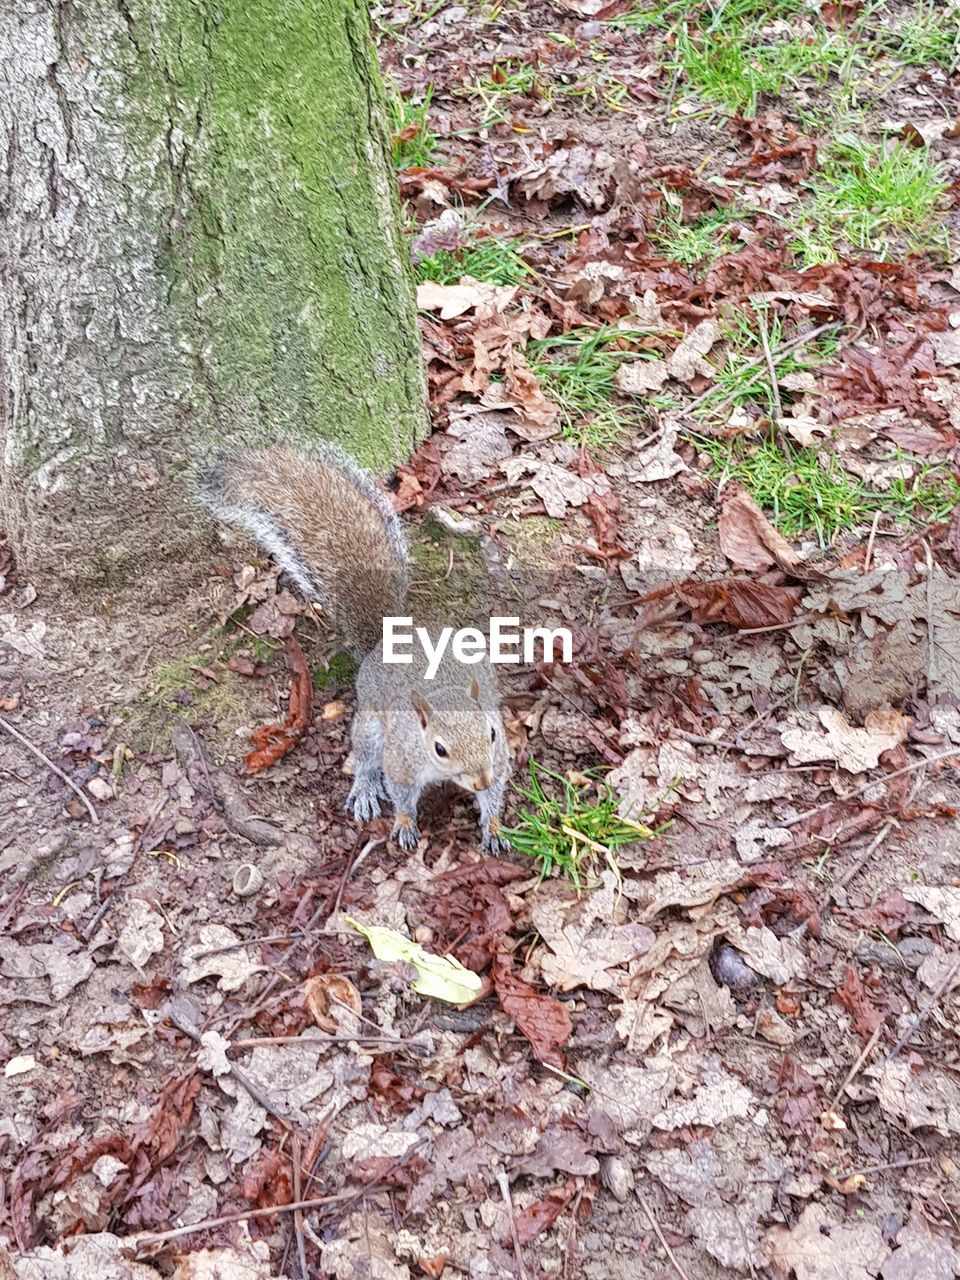 HIGH ANGLE VIEW OF SQUIRREL ON TREE STUMP IN FIELD